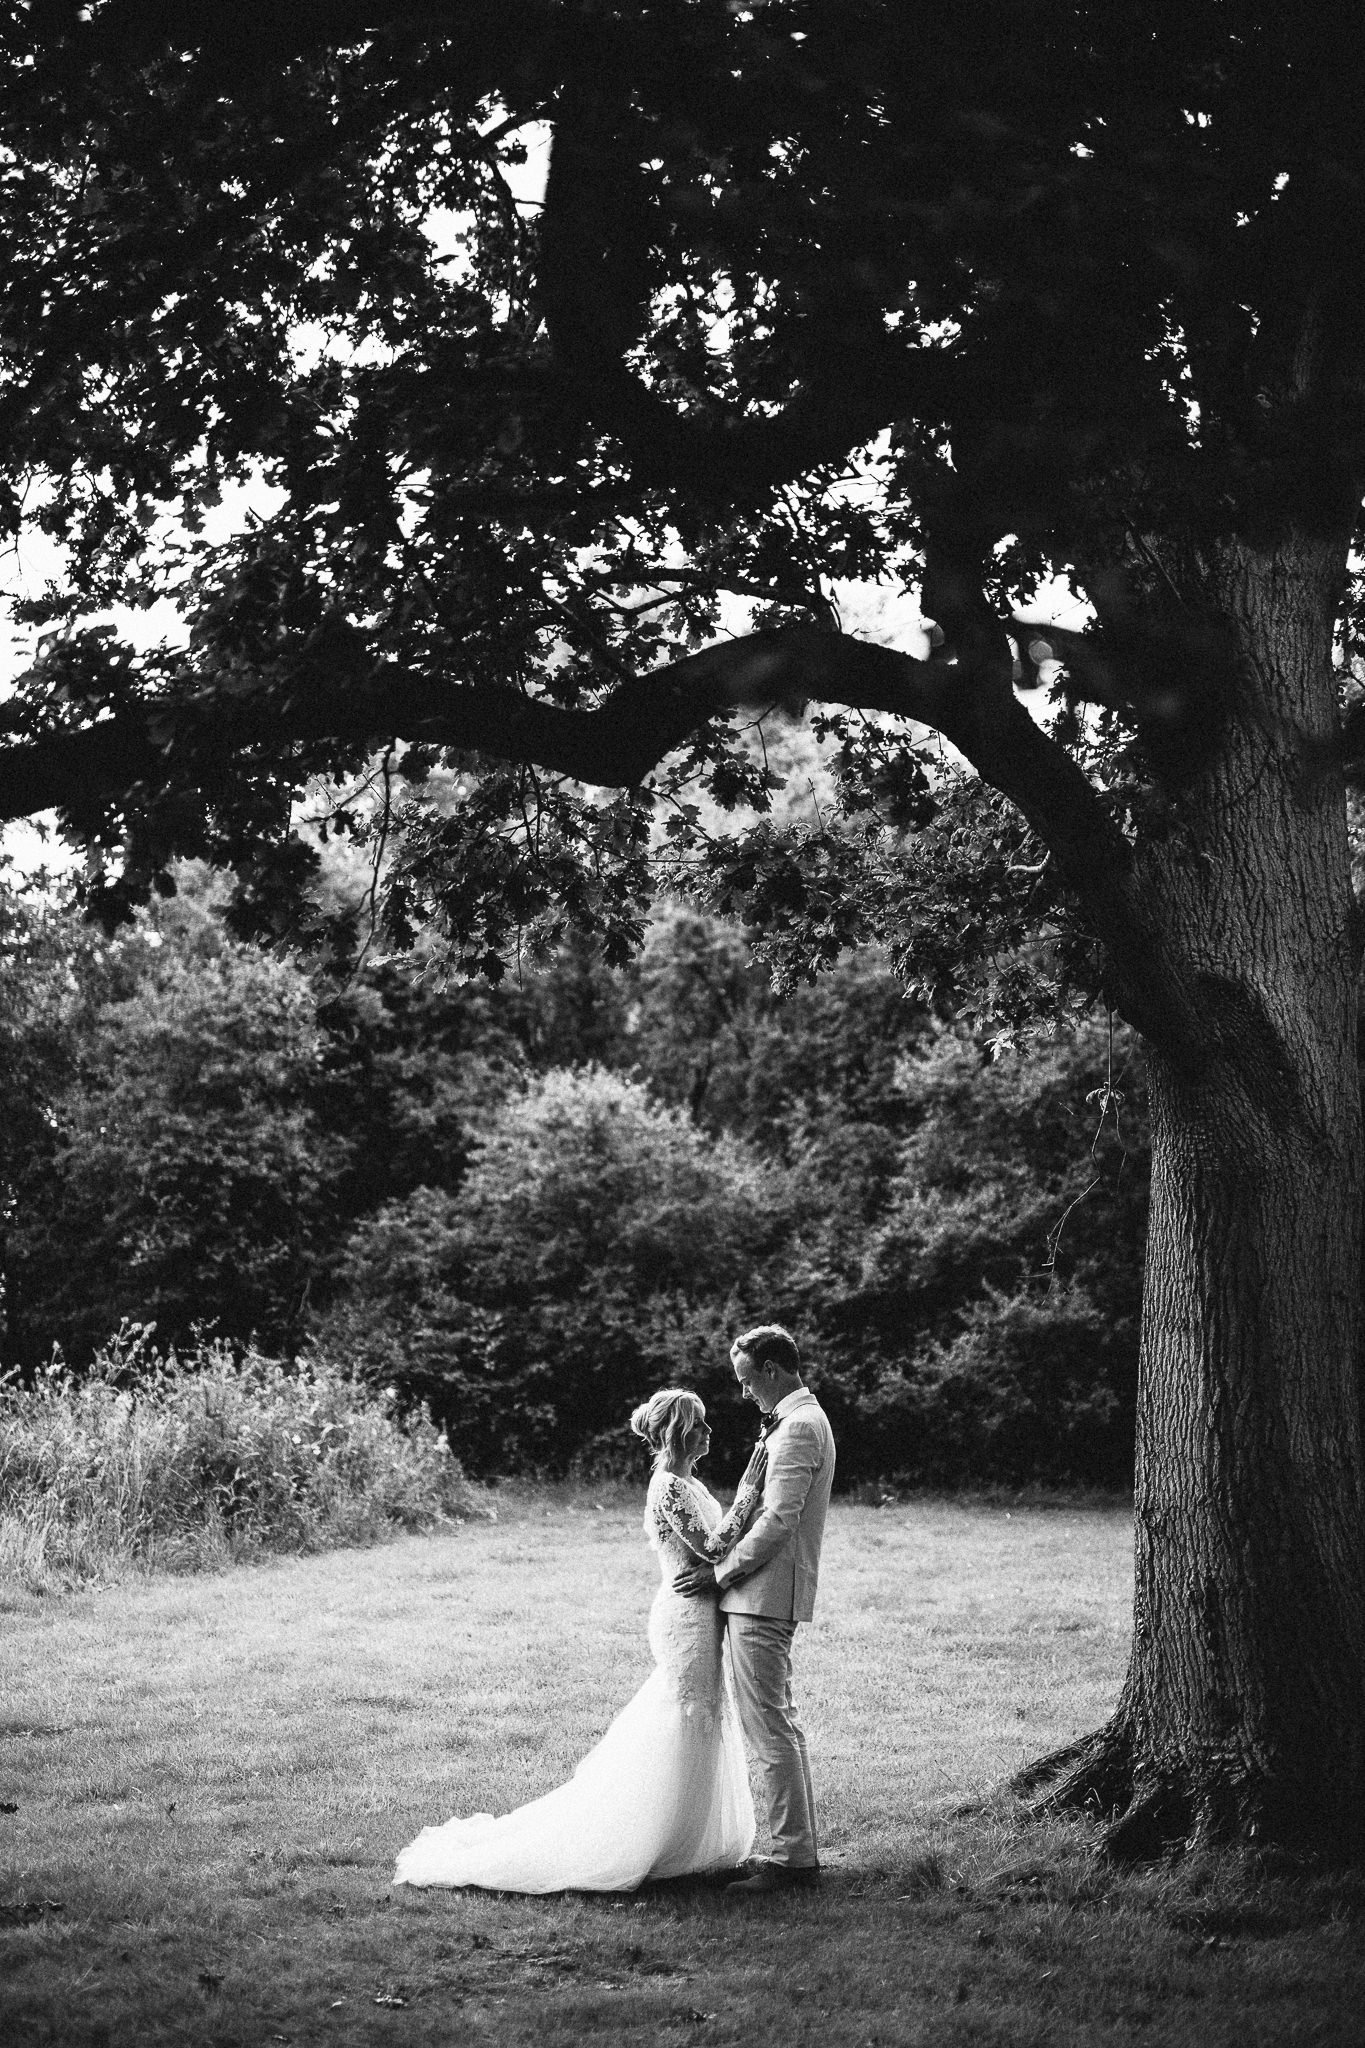  Bride and Groom under a large tree in a field 